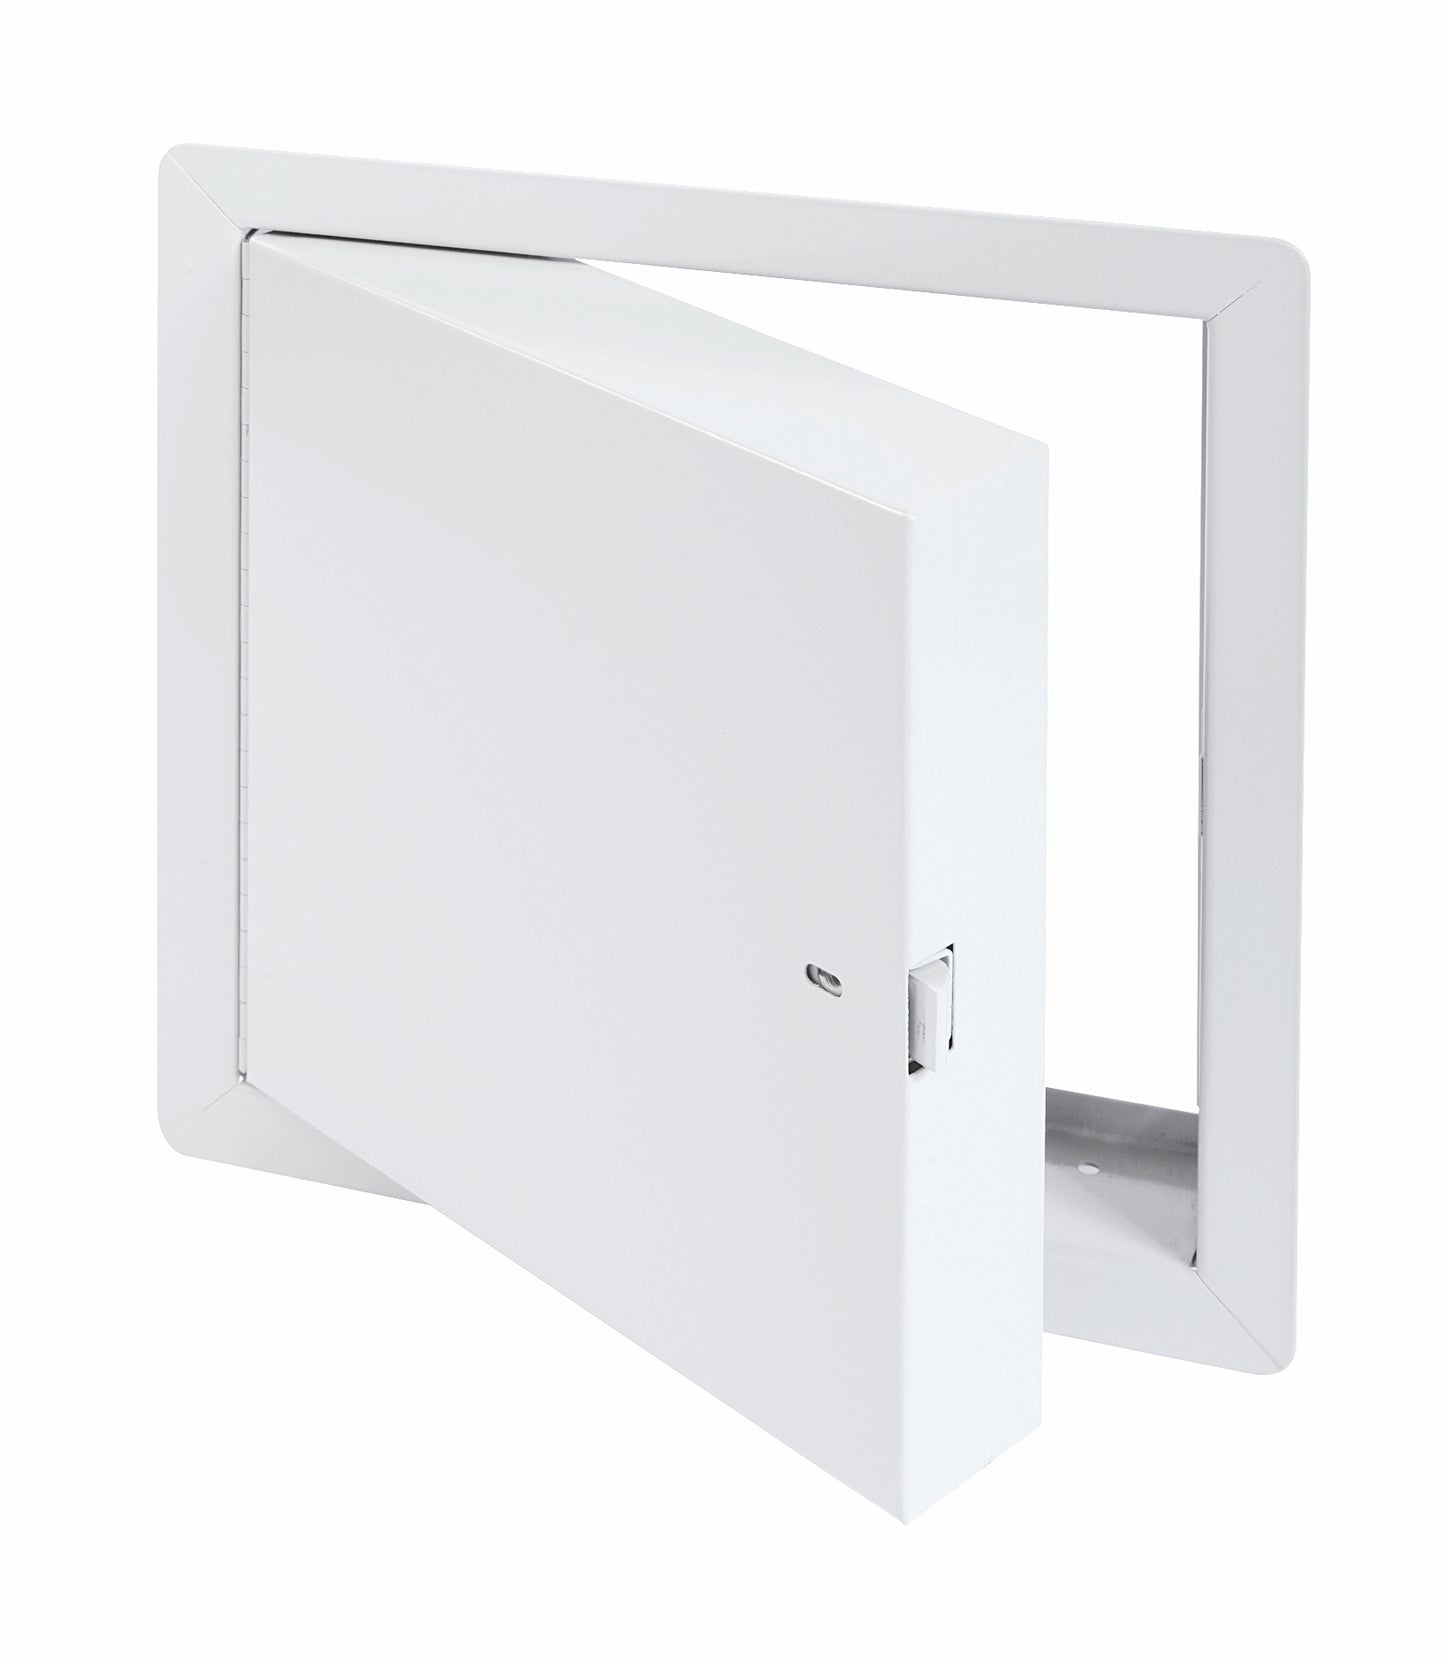 24"x48" Fire-rated Insulated Access Door with Exposed Flange, Cendrex